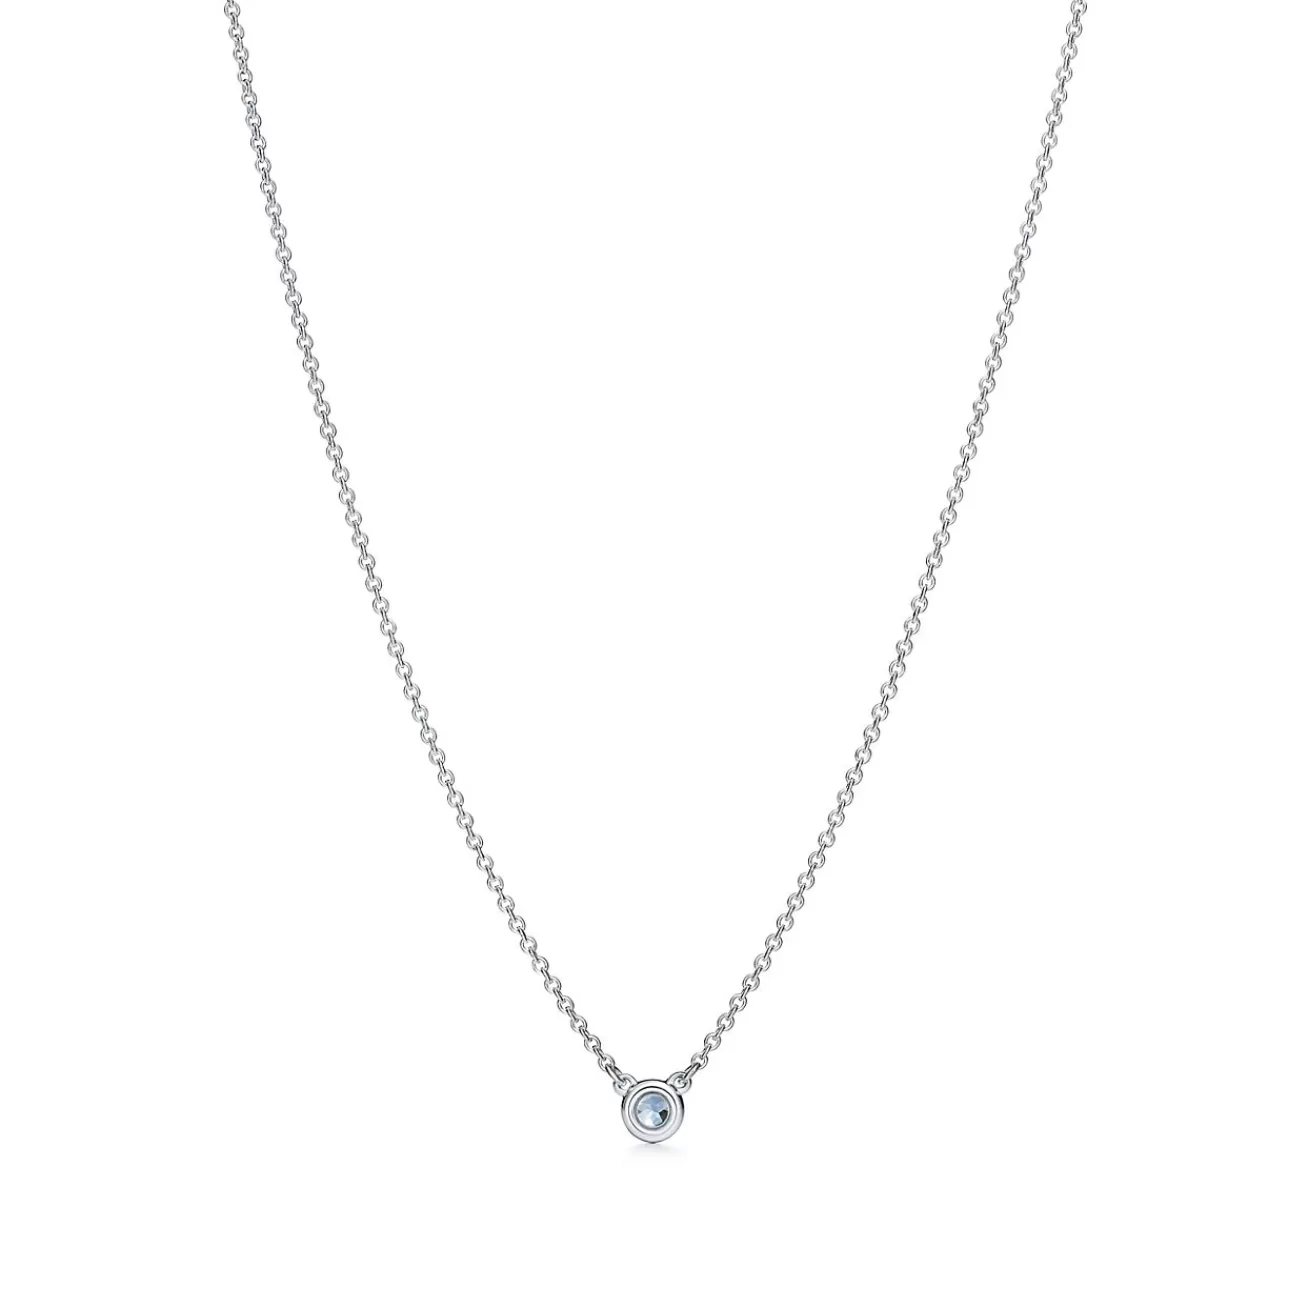 Tiffany & Co. Elsa Peretti® Color by the Yard Aquamarine Pendant in Silver | ^ Necklaces & Pendants | Sterling Silver Jewelry